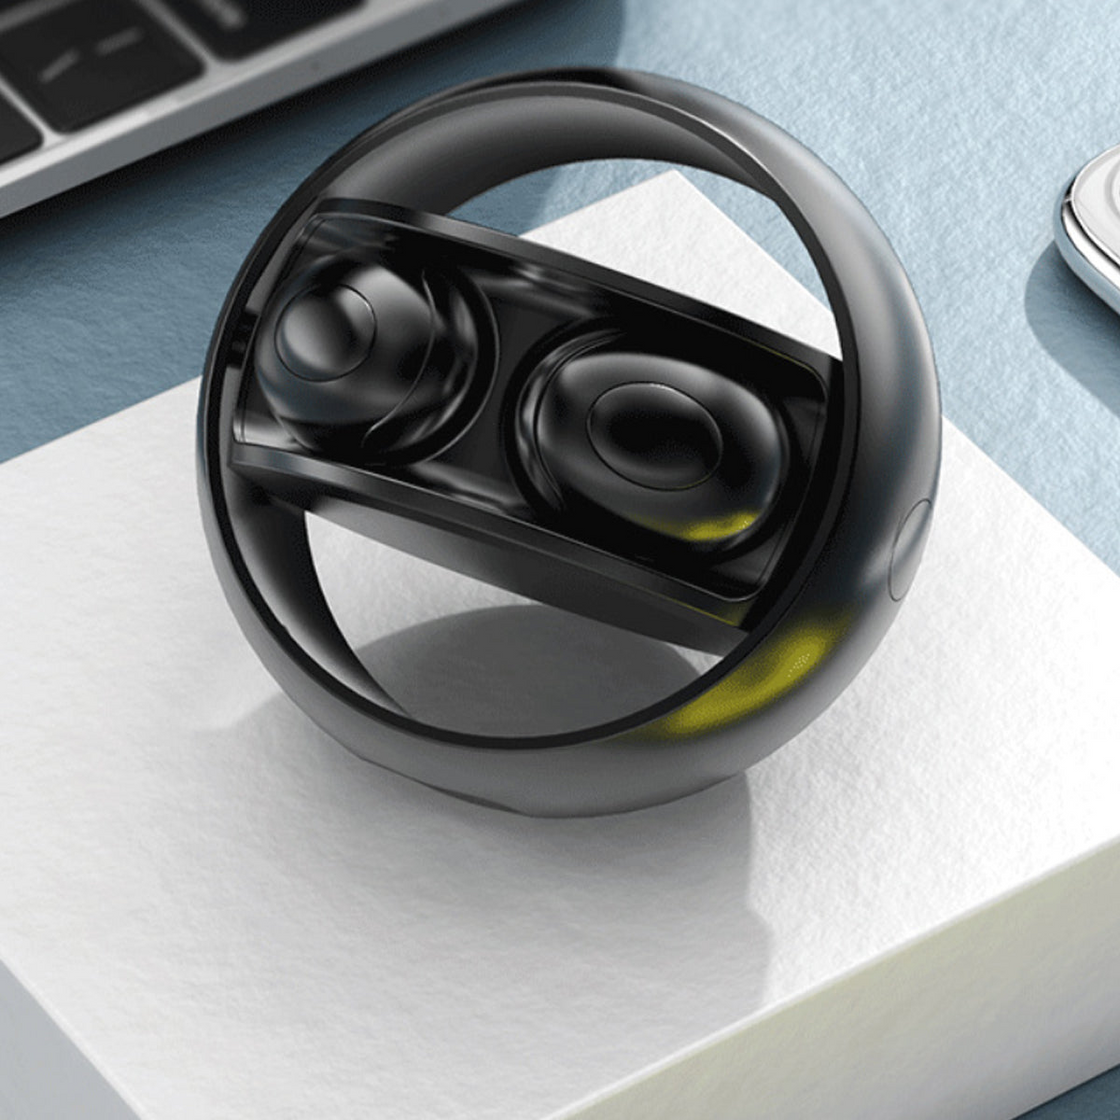 Swayaway Super Clear Sound Bluetooth Earbuds